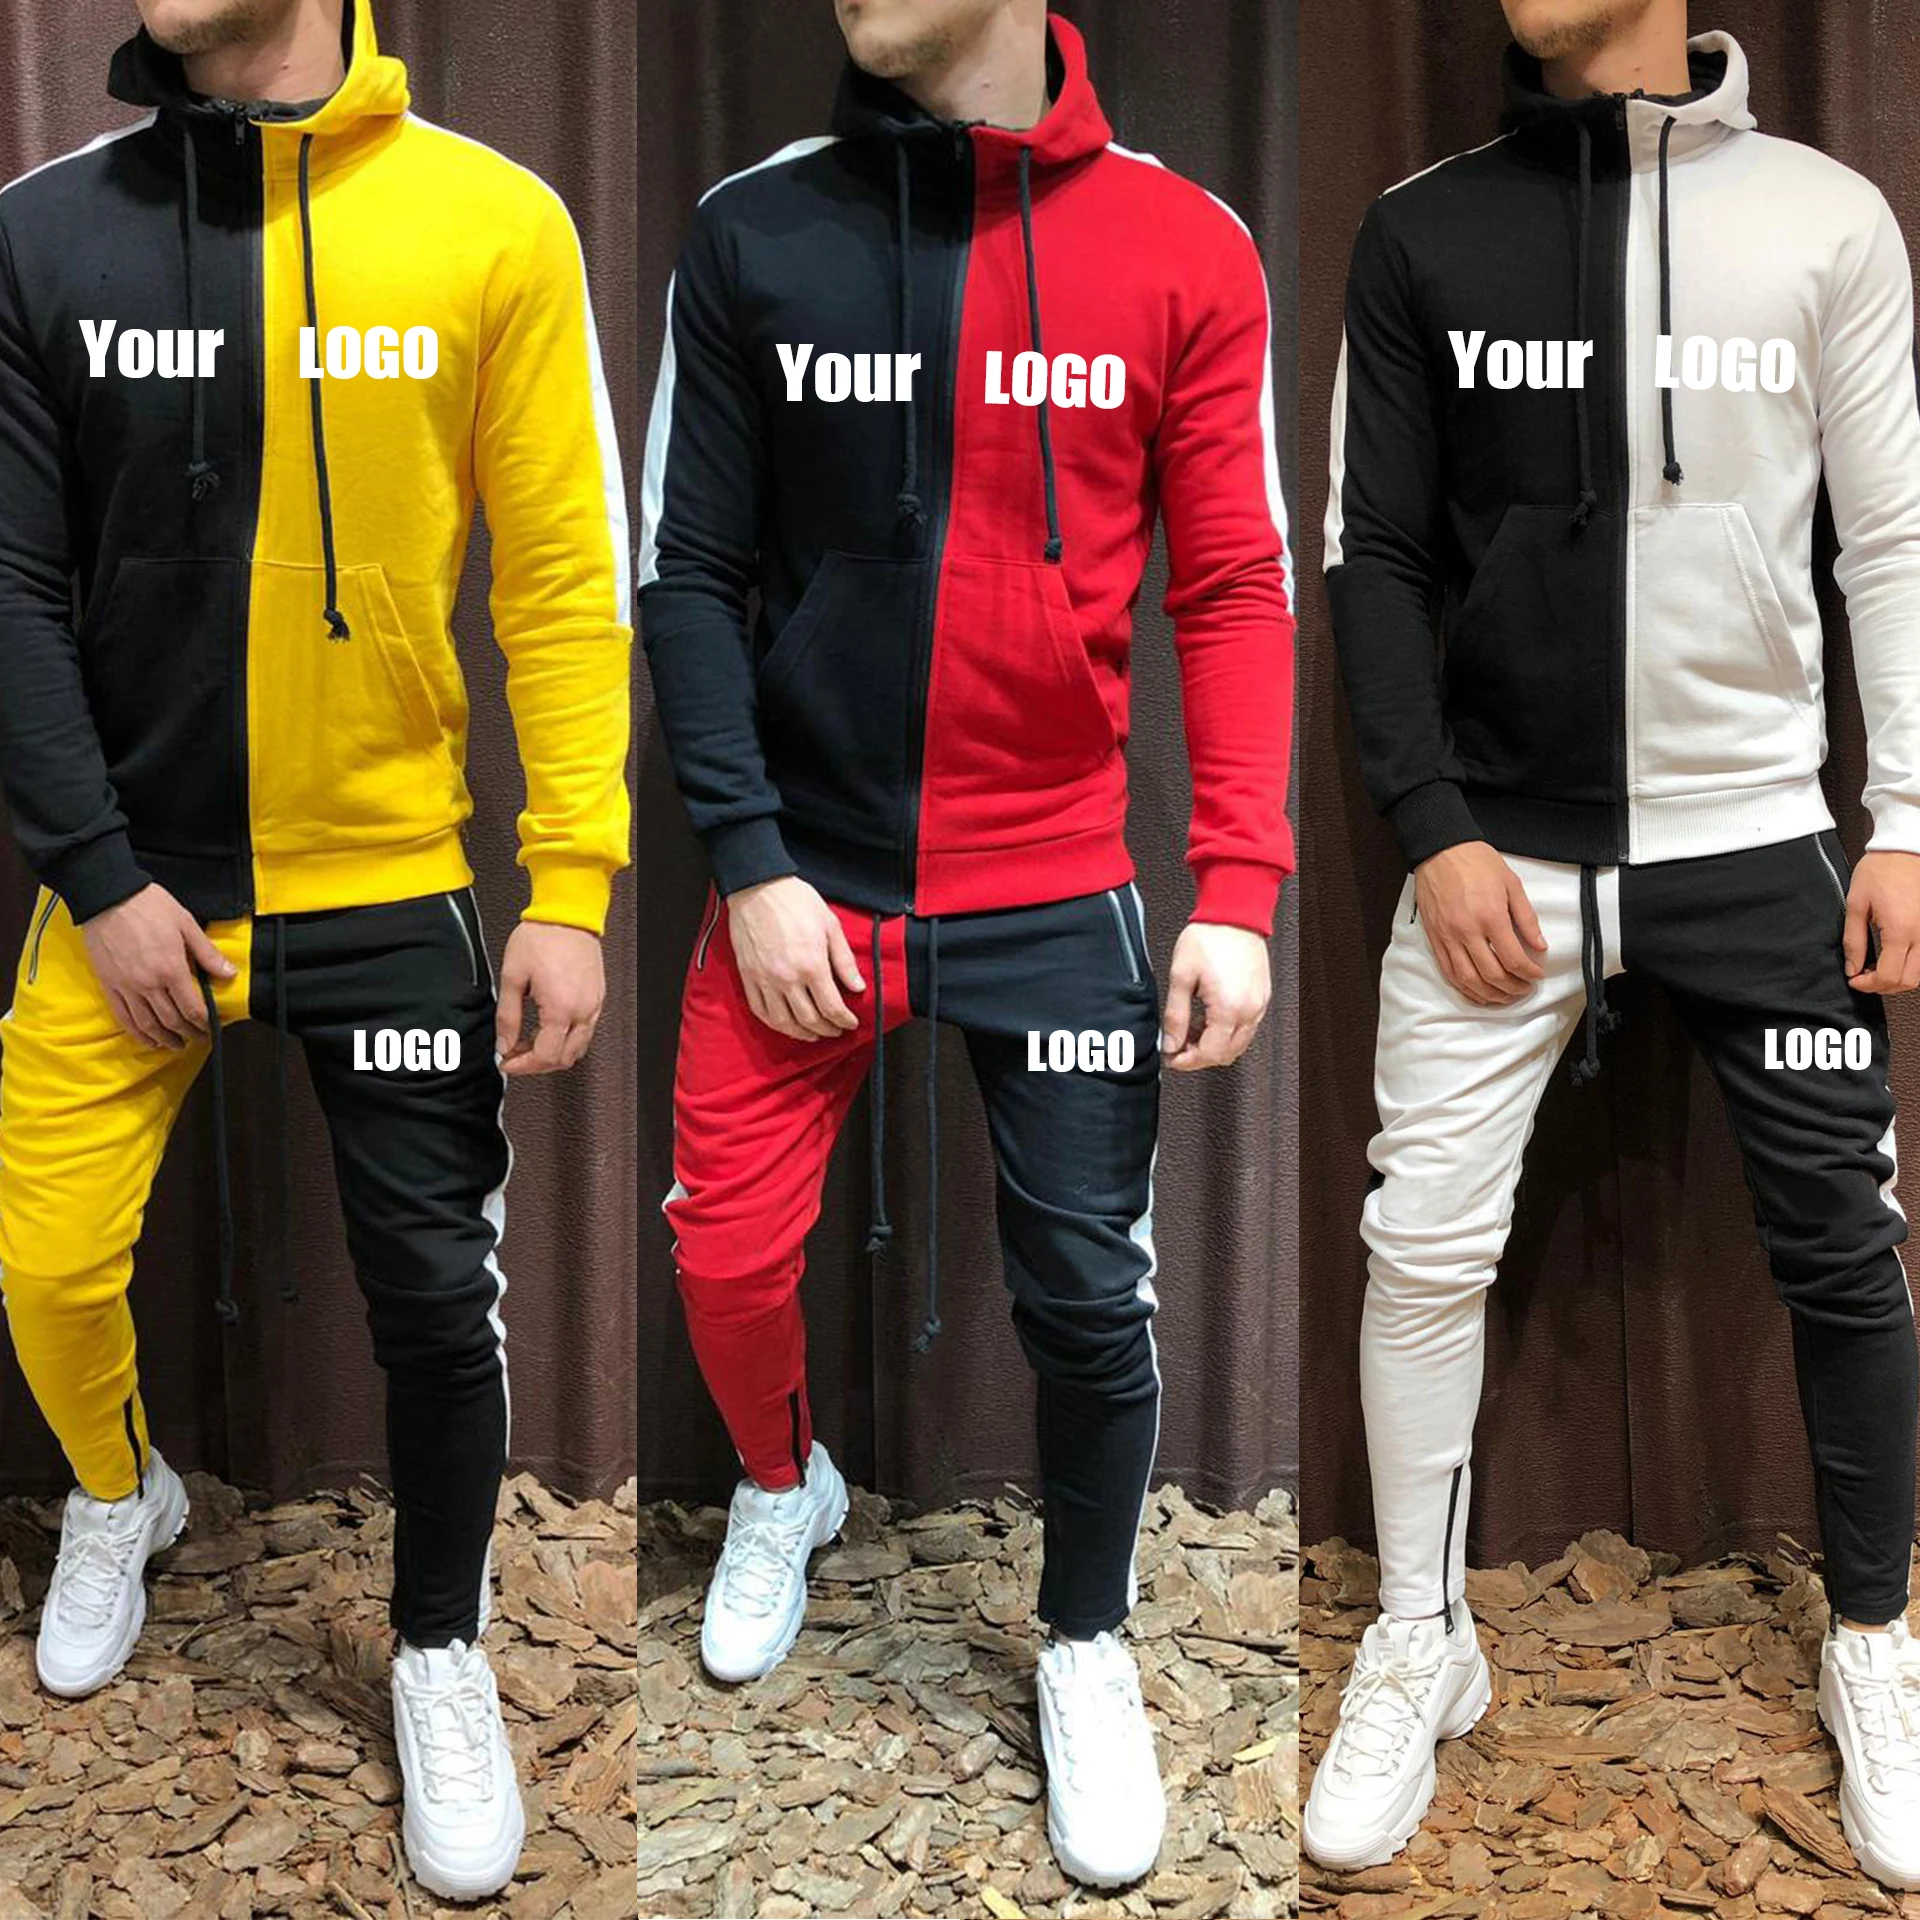 

Custom tracksuit sweatsuit with logo men private label track sweat suit blank jogger jogging set sweatpants and zip up hoodie, 7 colors